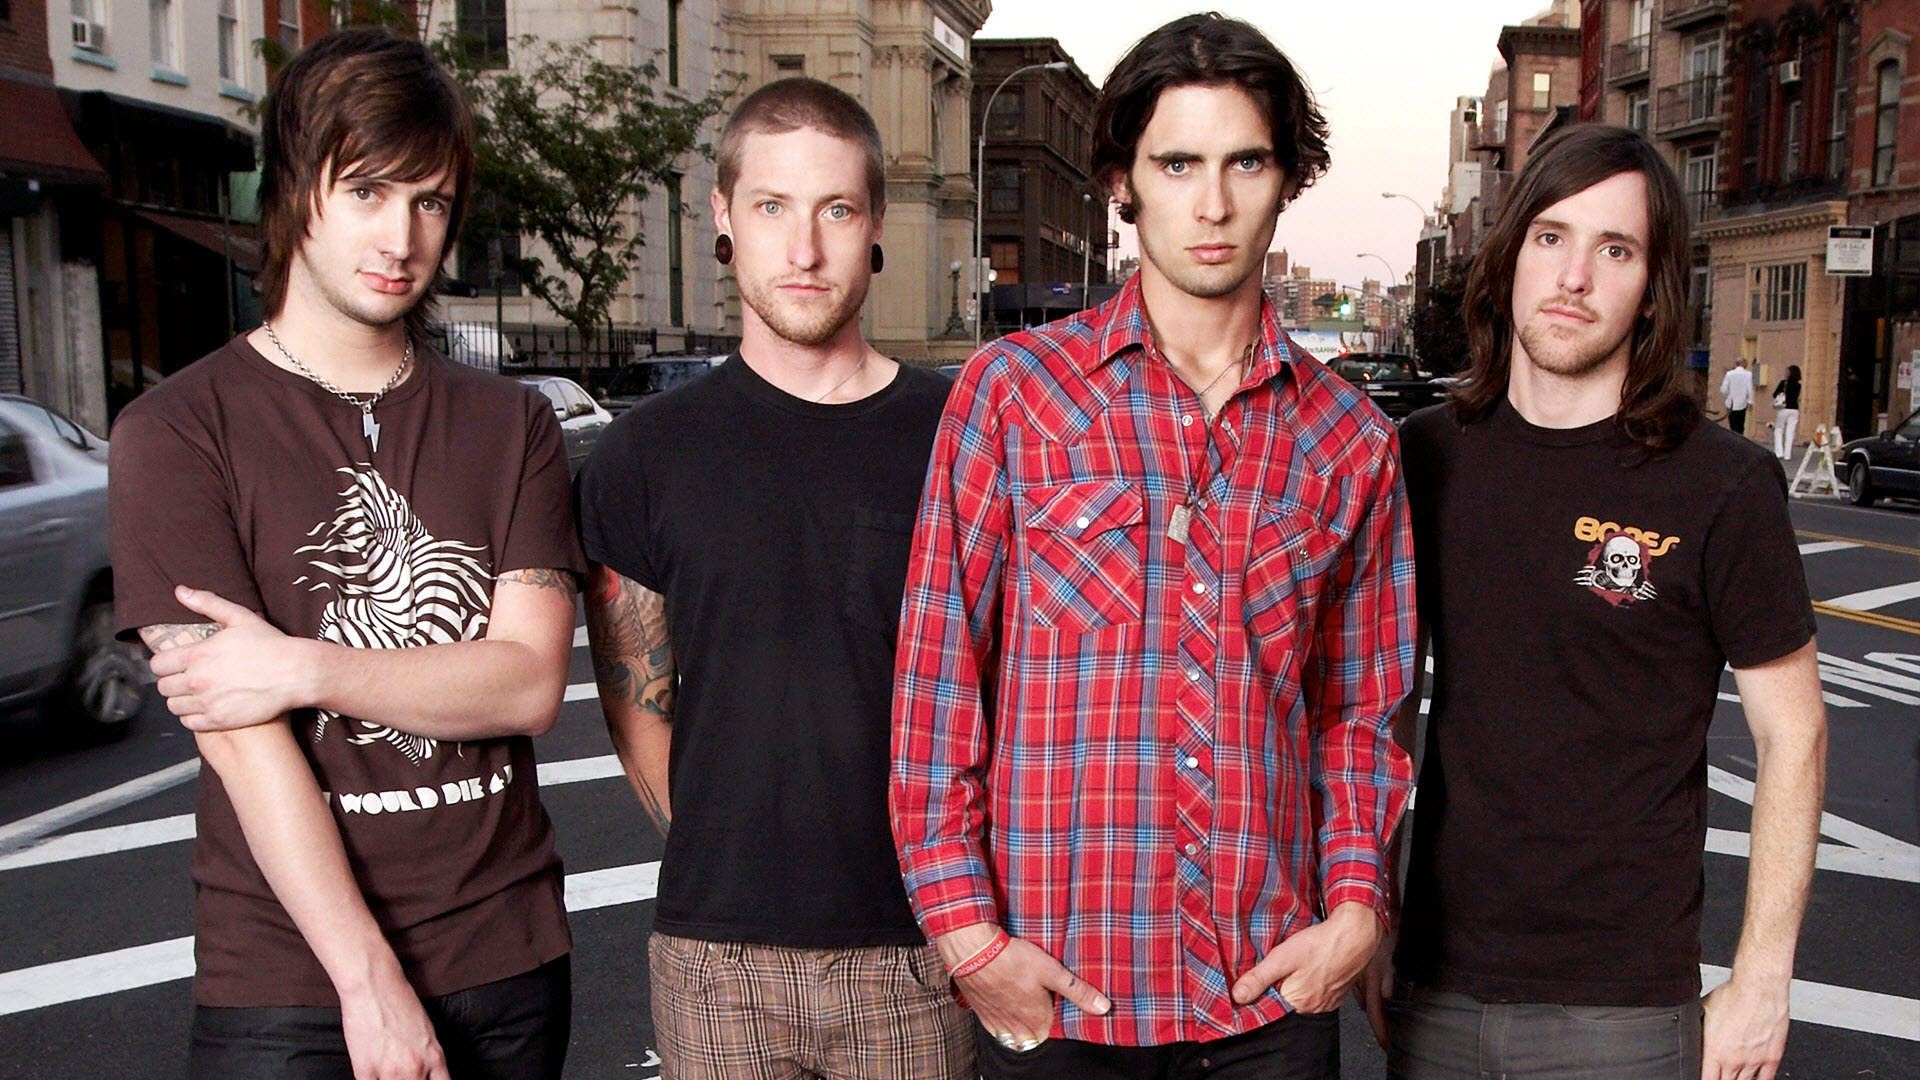  Beekeeper's Daughter av The All American Rejects